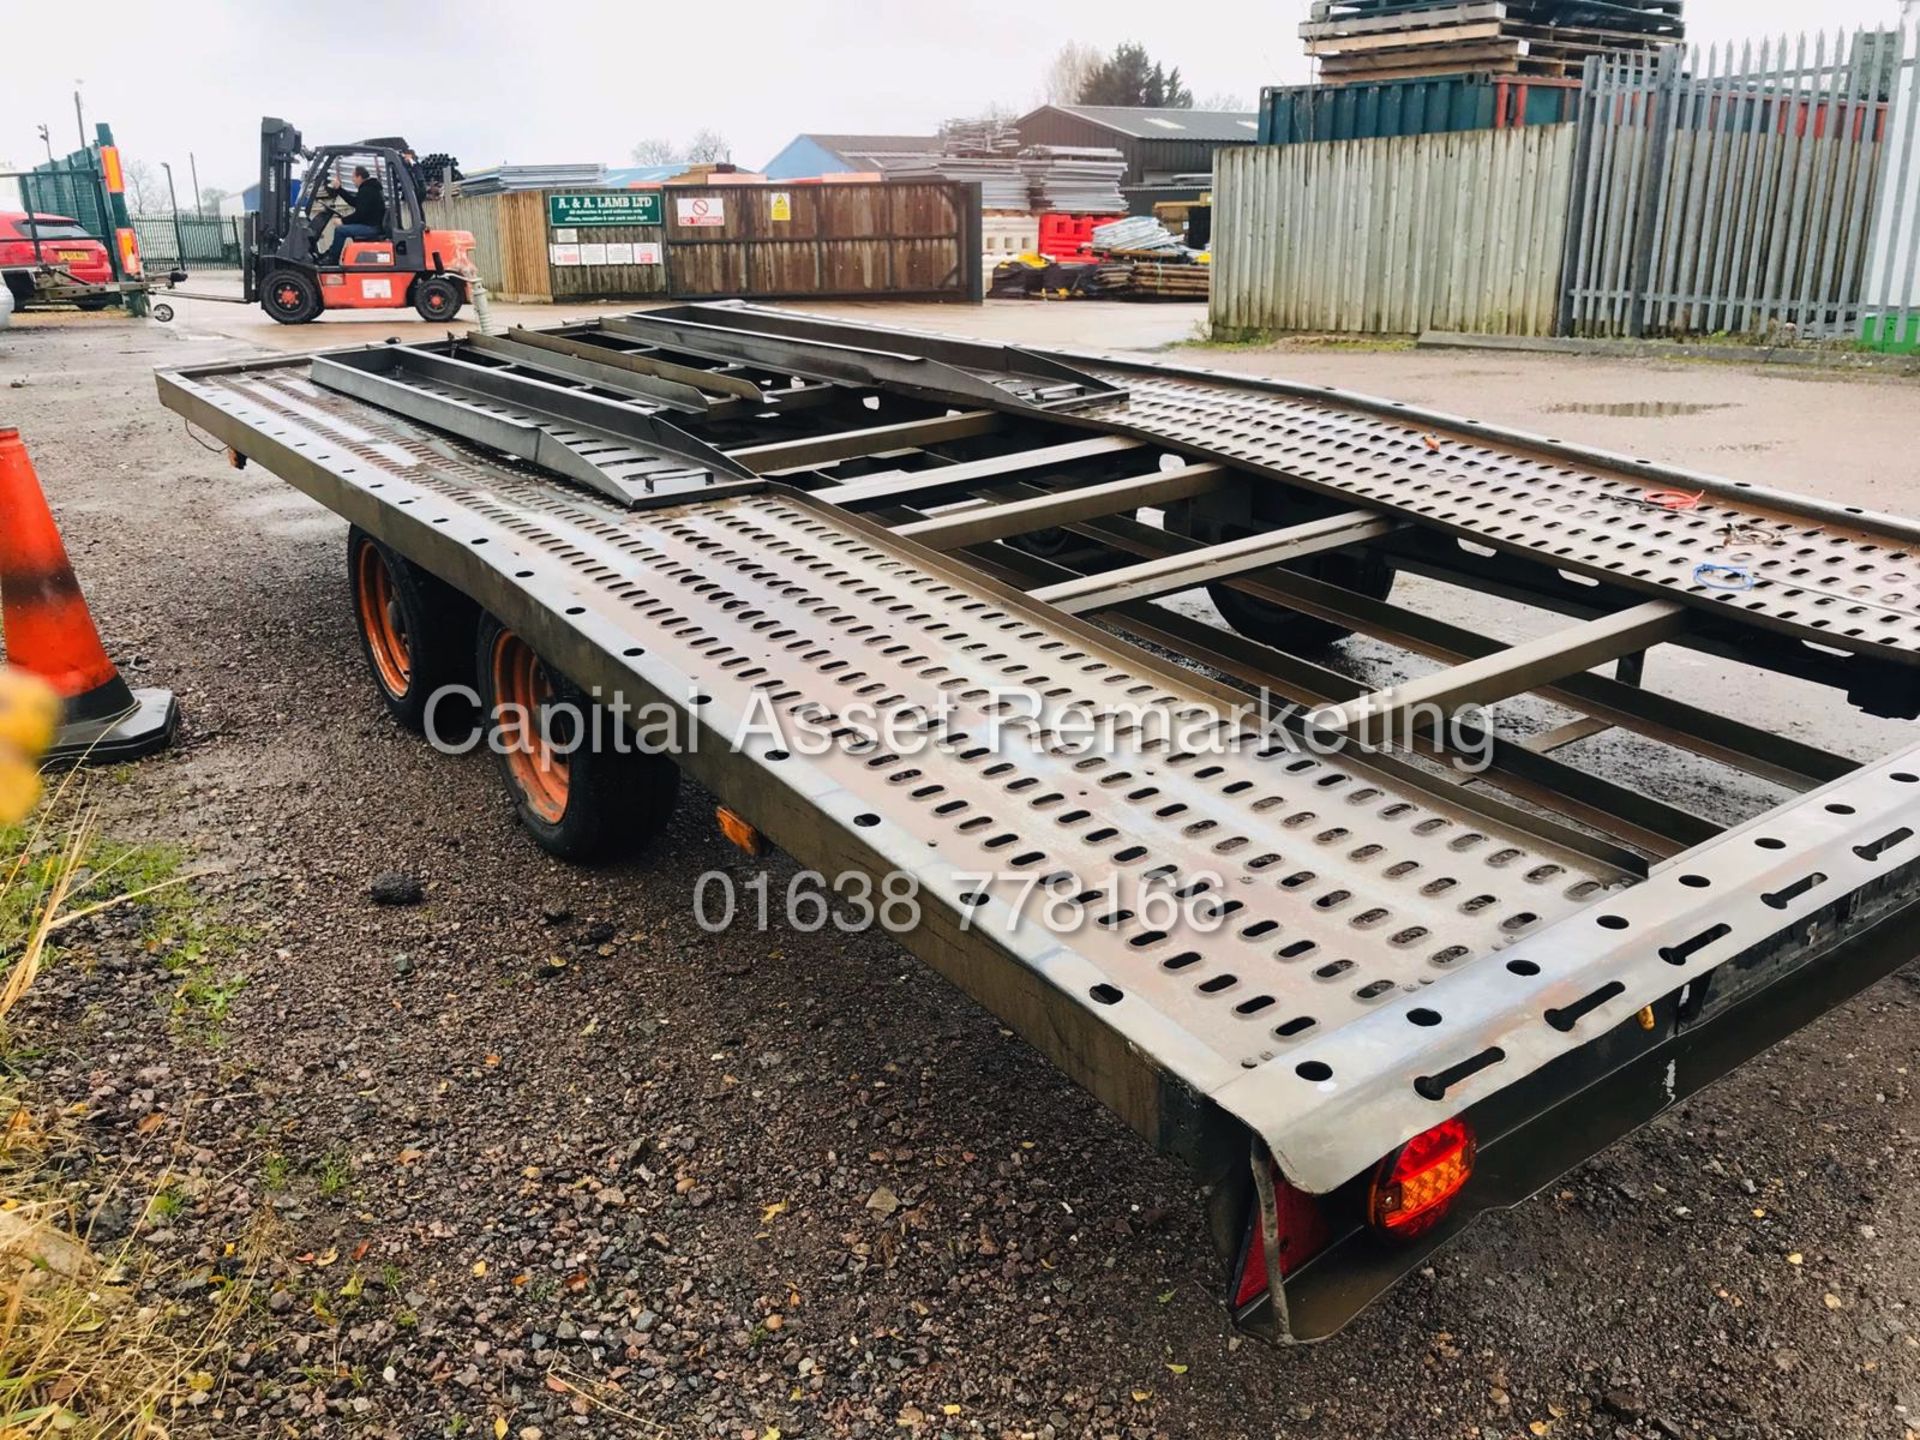 (On Sale) BRIAN JAMES TYPE (PRG) RECOVERY / TRANSPORTER TRAILER - 17 FOOT (NO VAT) - Image 2 of 7